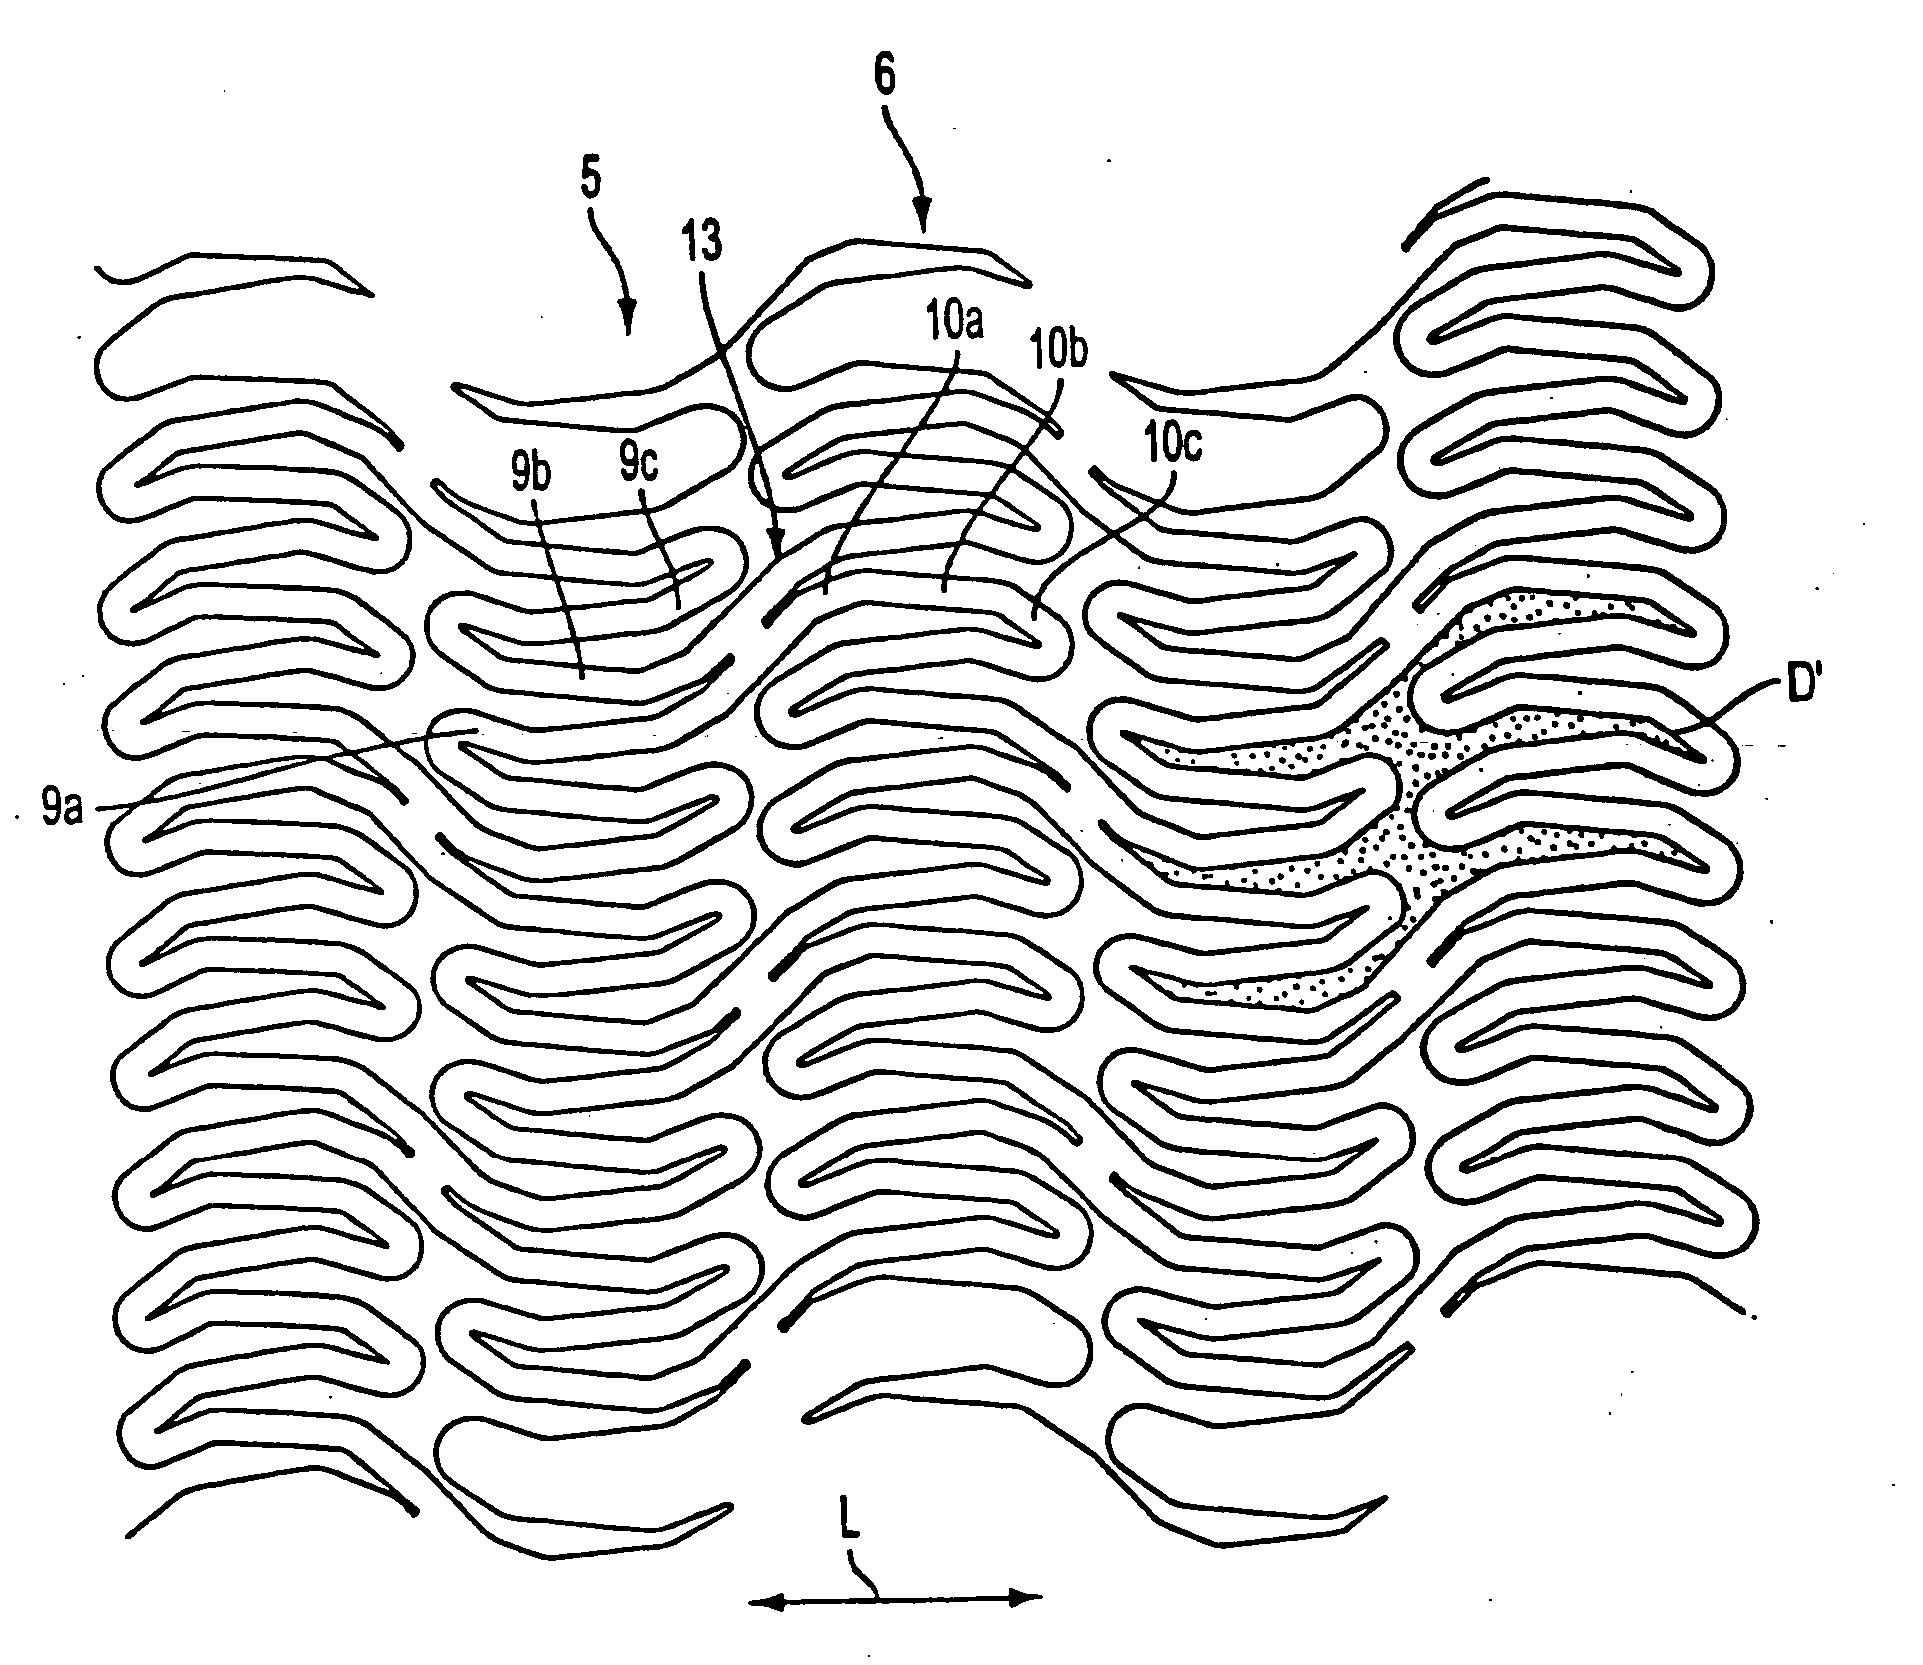 Methods and apparatus for a stent having an expandable web structure